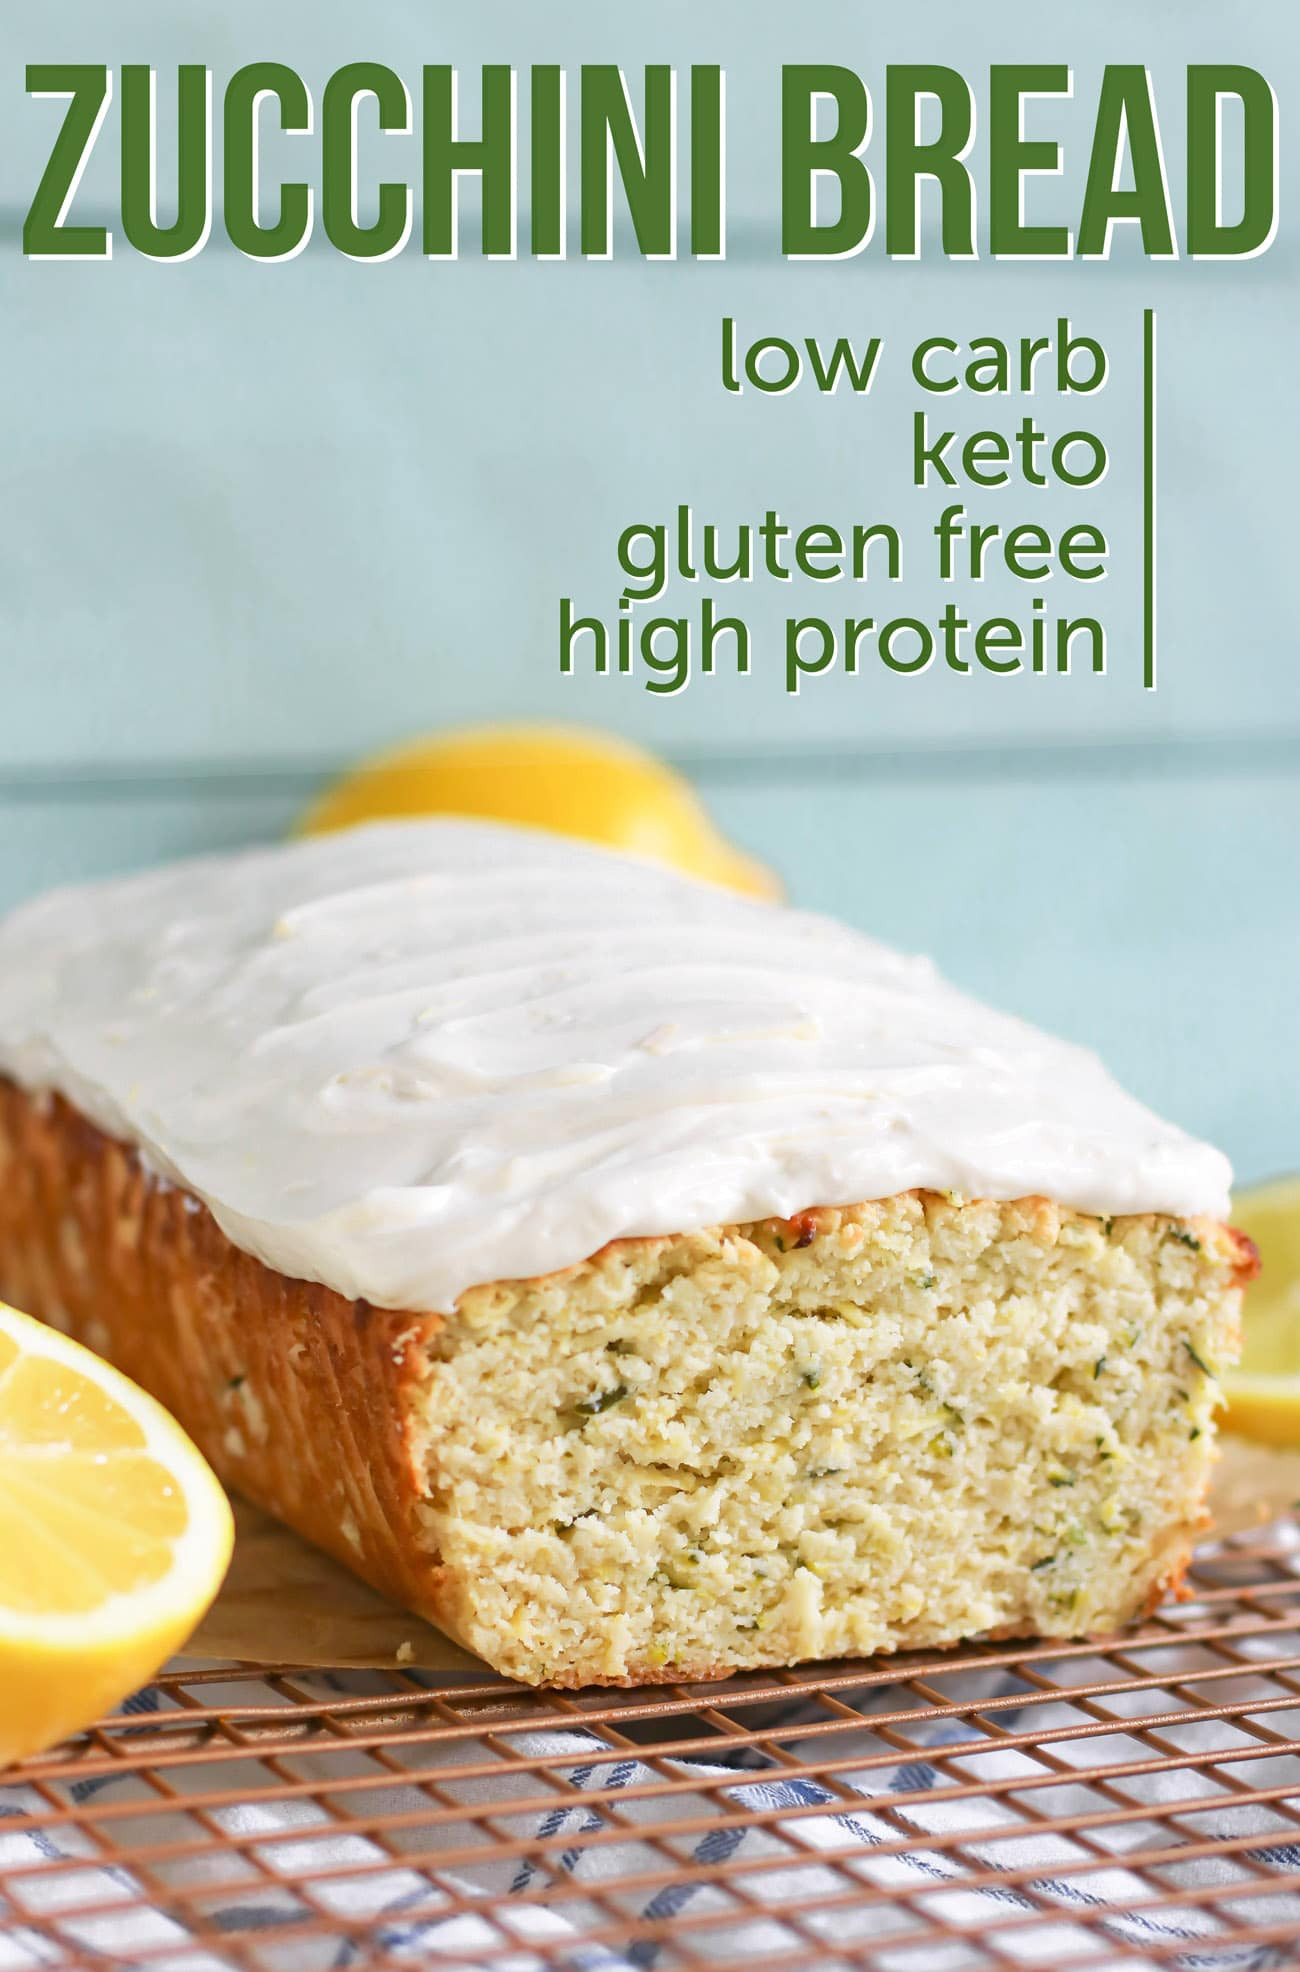 Keto Zucchini Bread With Cream Cheese
 Low Carb Keto Gluten Free Zucchini Bread with Cream